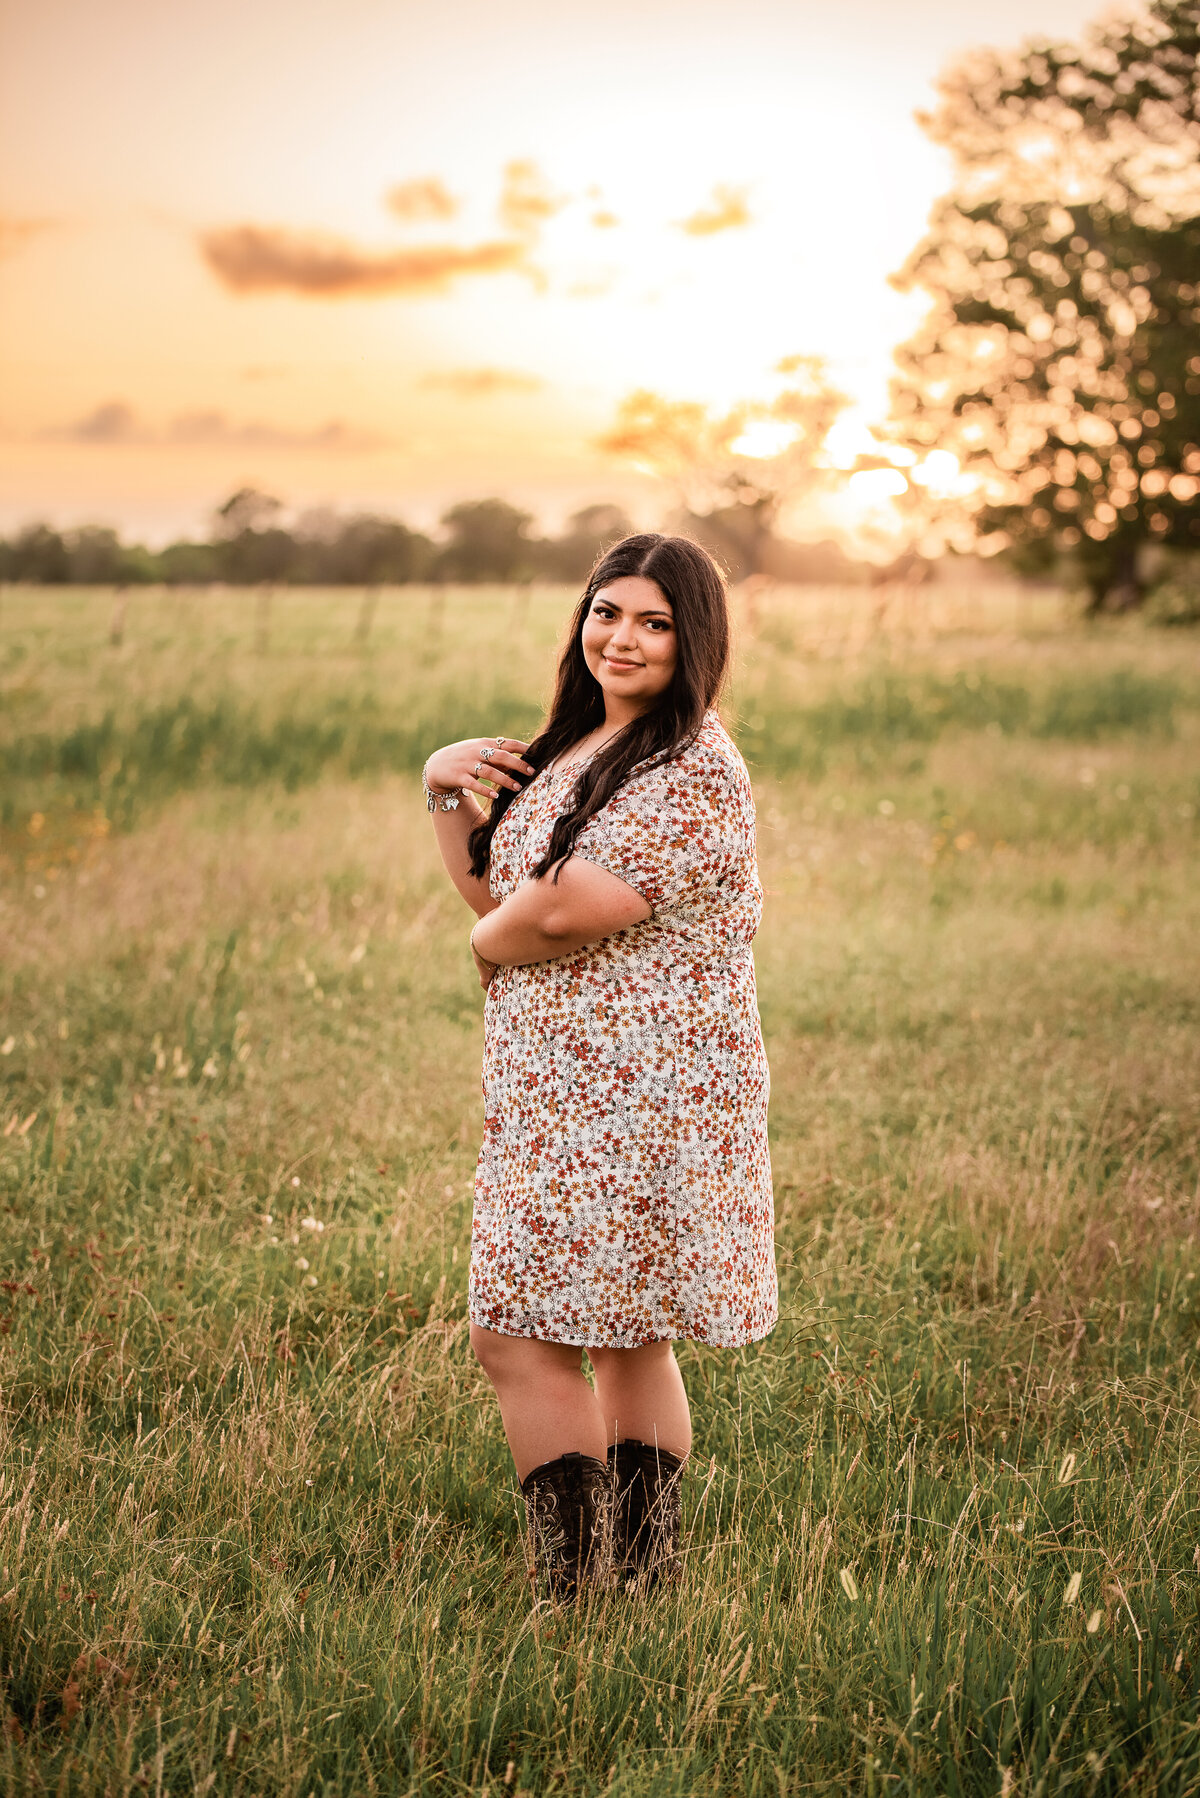 A Houston senior stands in a field wearing cowboy boots and a floral dress.